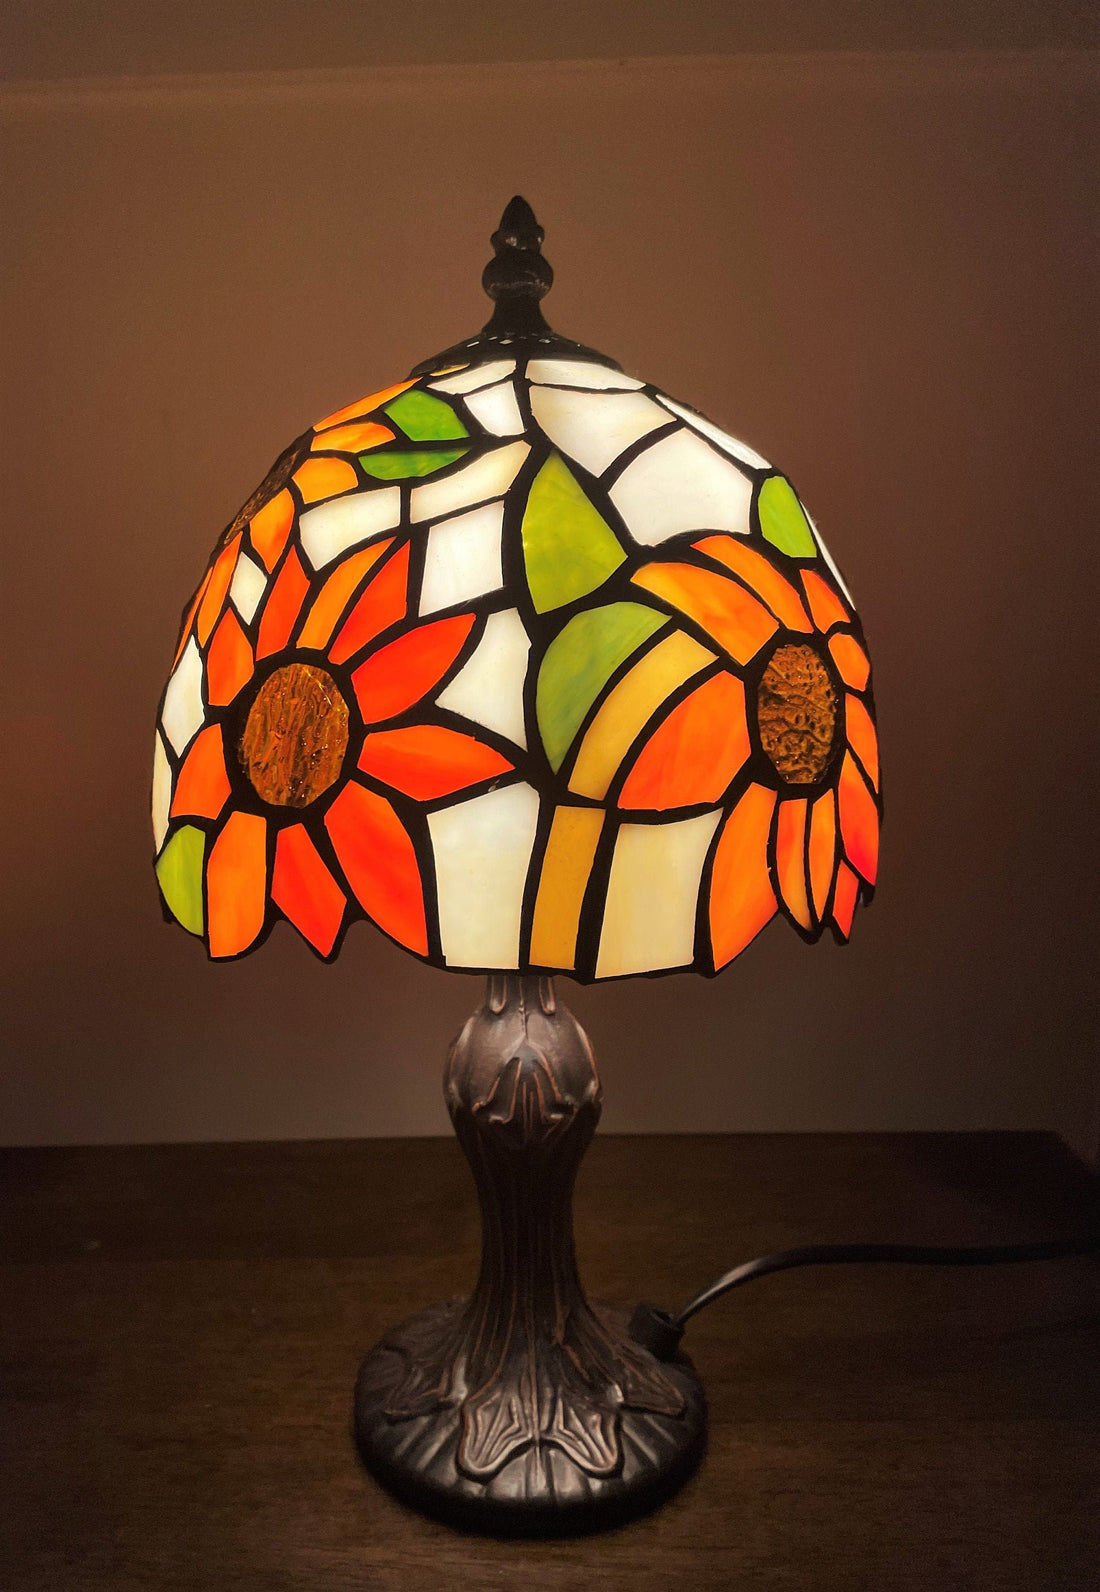 Sunflower Tiffany Lamp, Leadglass Stained Glass Shade, Crystal Bead Lamp Shade, Antique Lampshade, Stained Glass Lamp Shade, Bedside Lamp